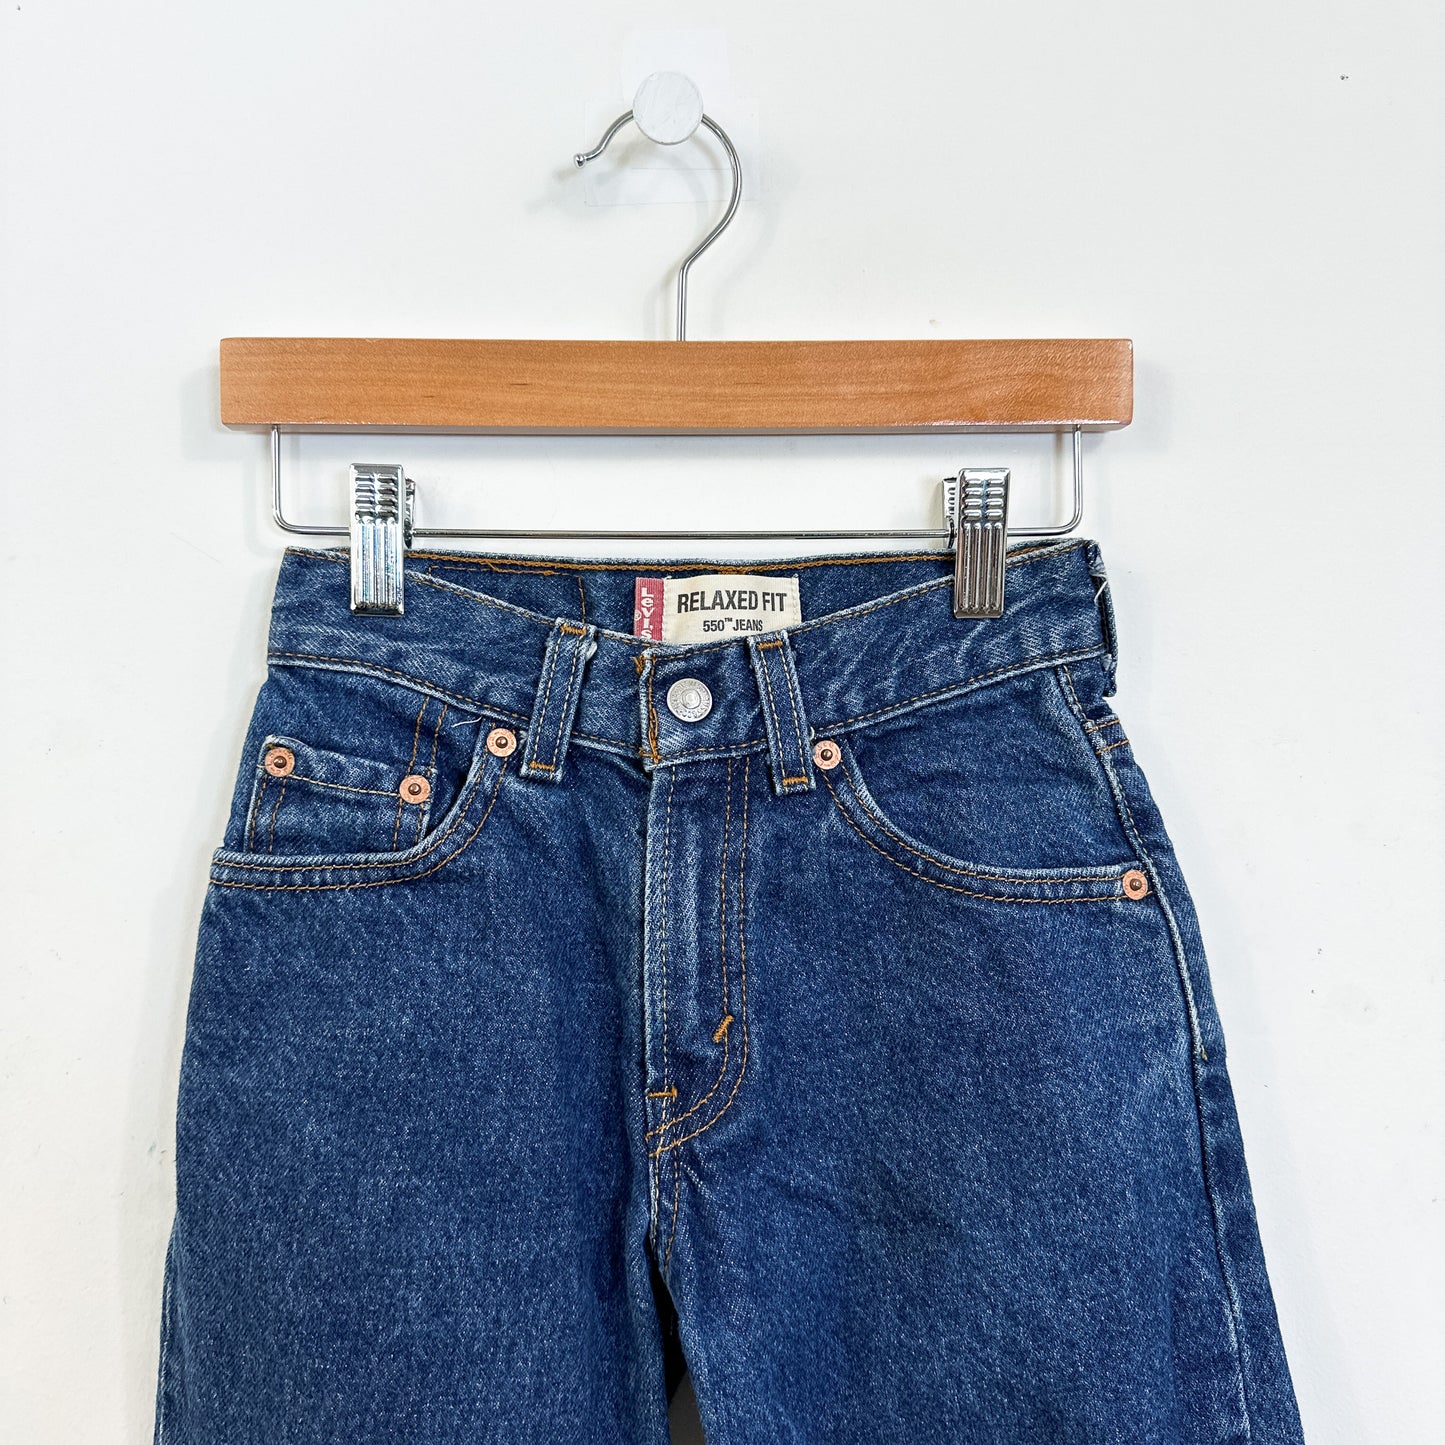 Vintage Kid's Levi's 550 Relaxed Fit Jeans - Size 6